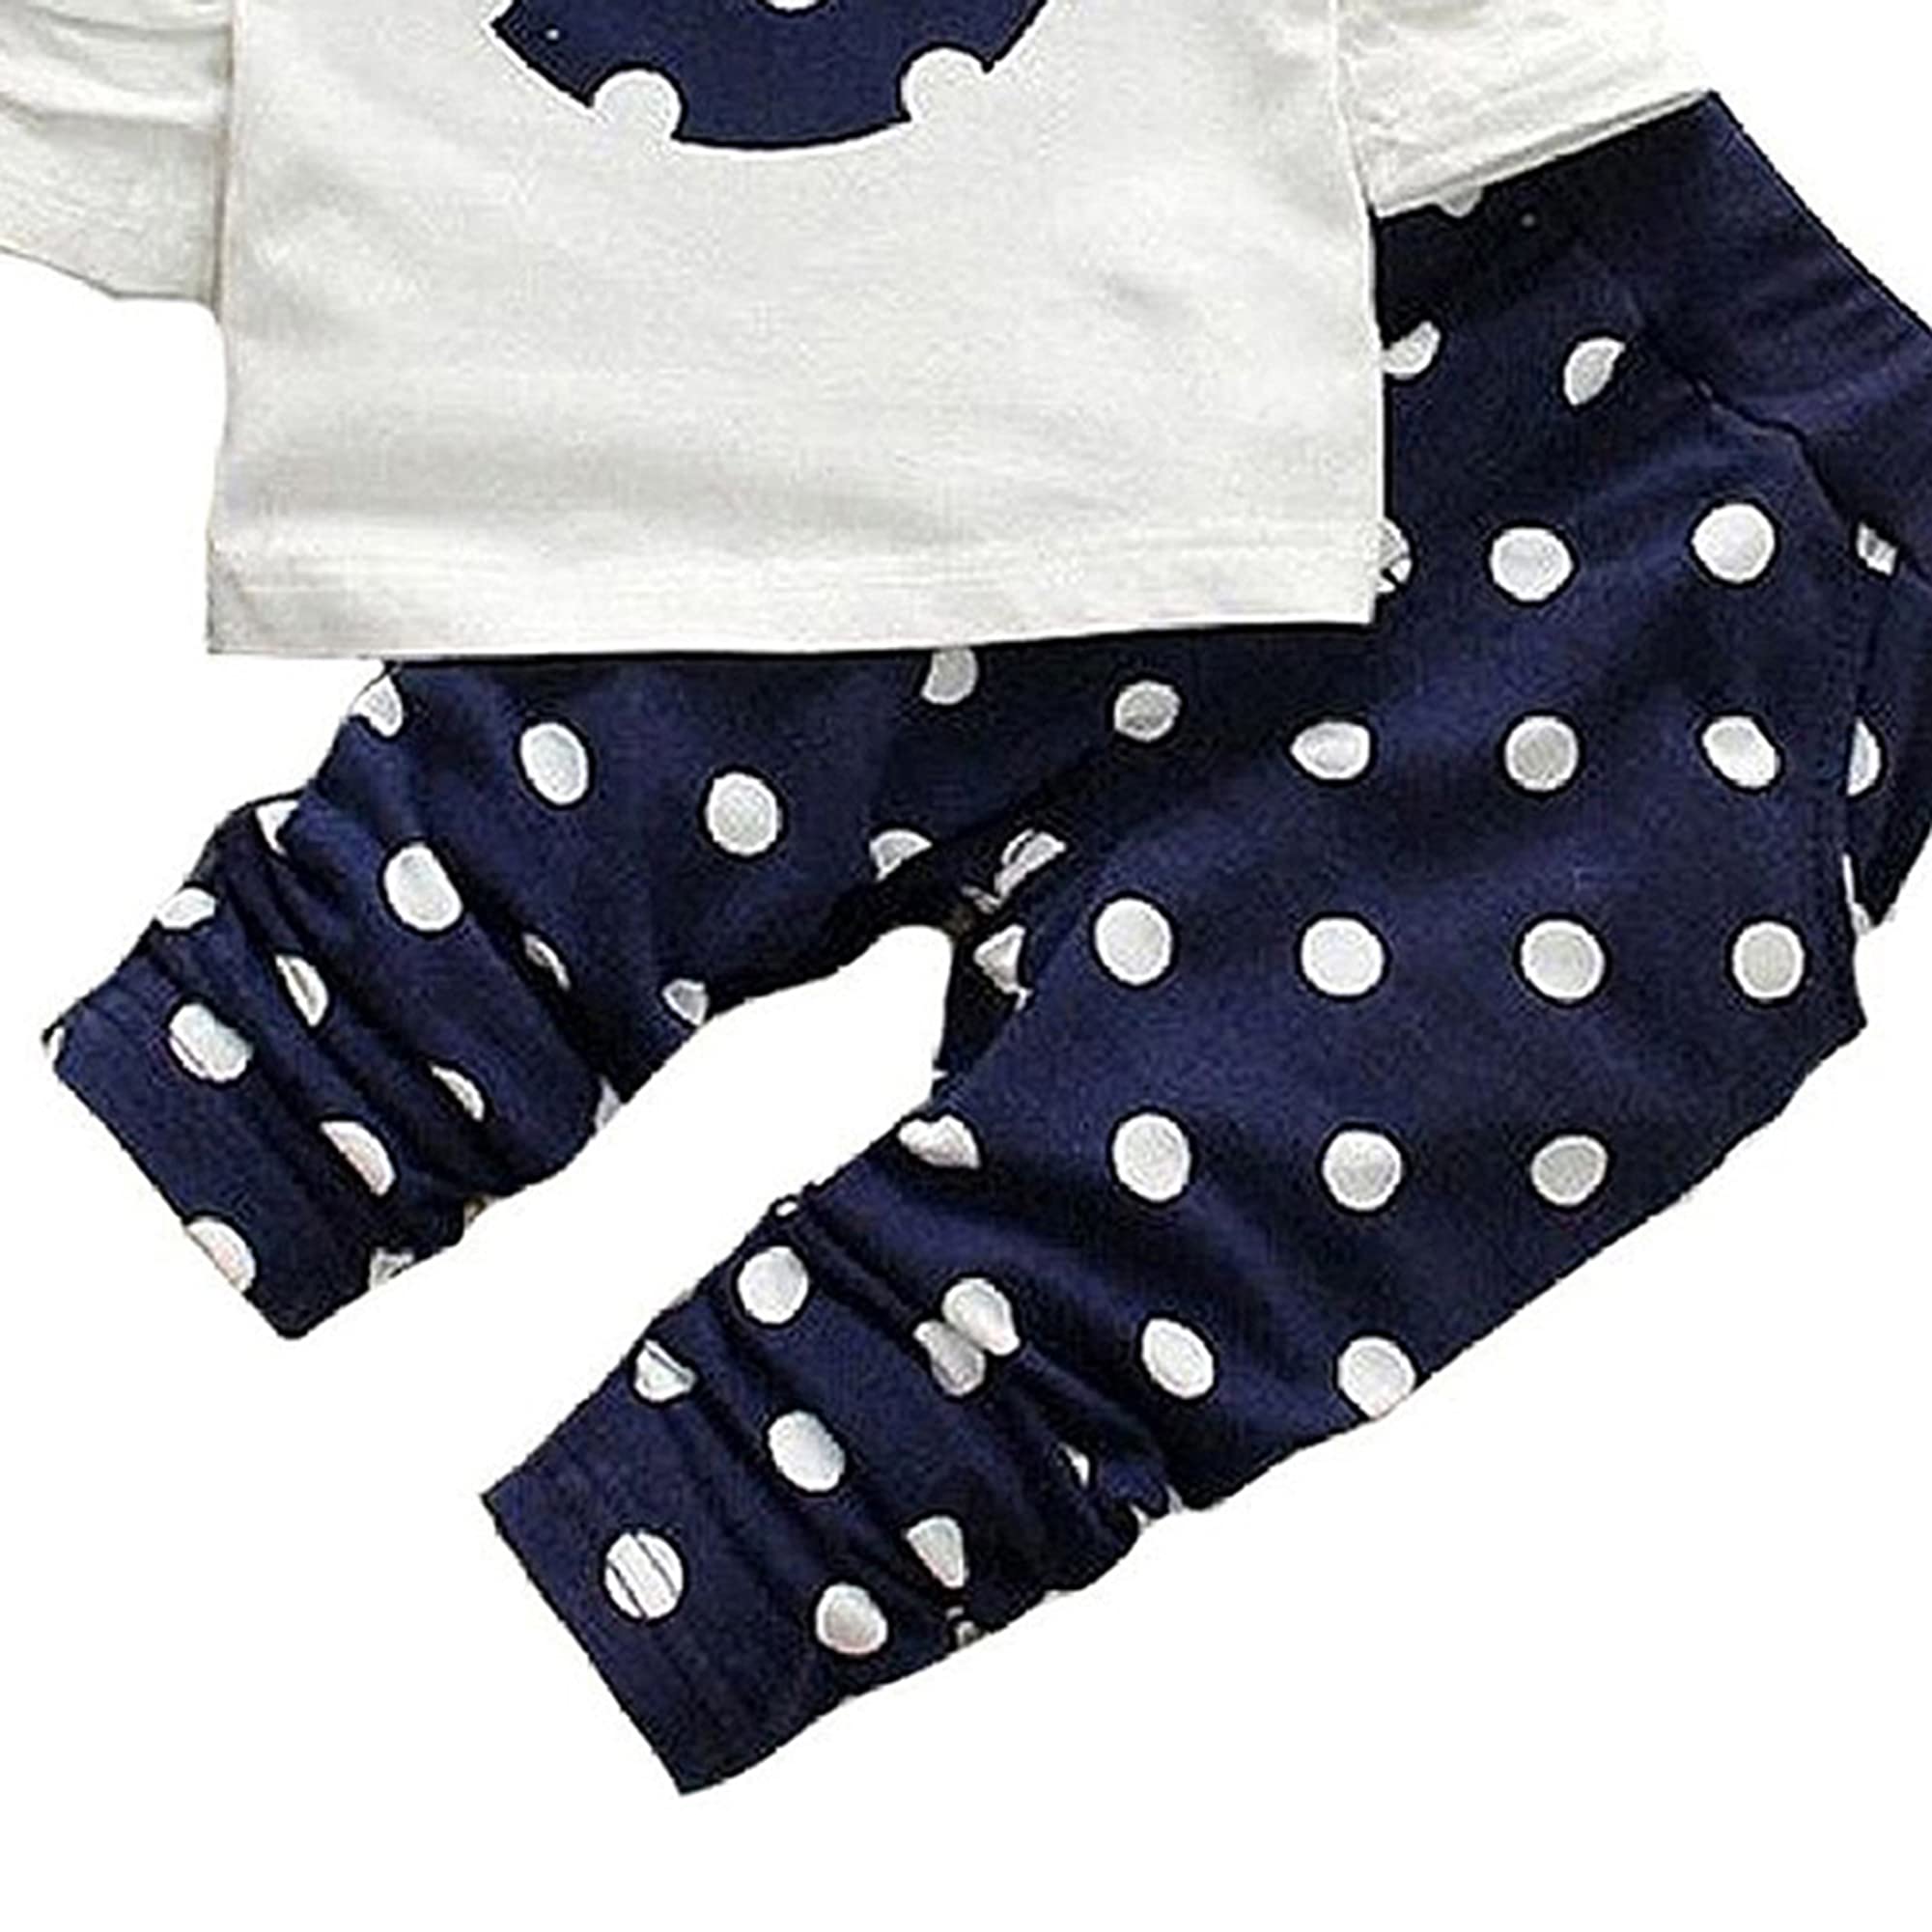 Avidqueen Cute Toddler Baby Girls Clothes Set Long Sleeve T-Shirt and Pants Kids 2pcs Outfits